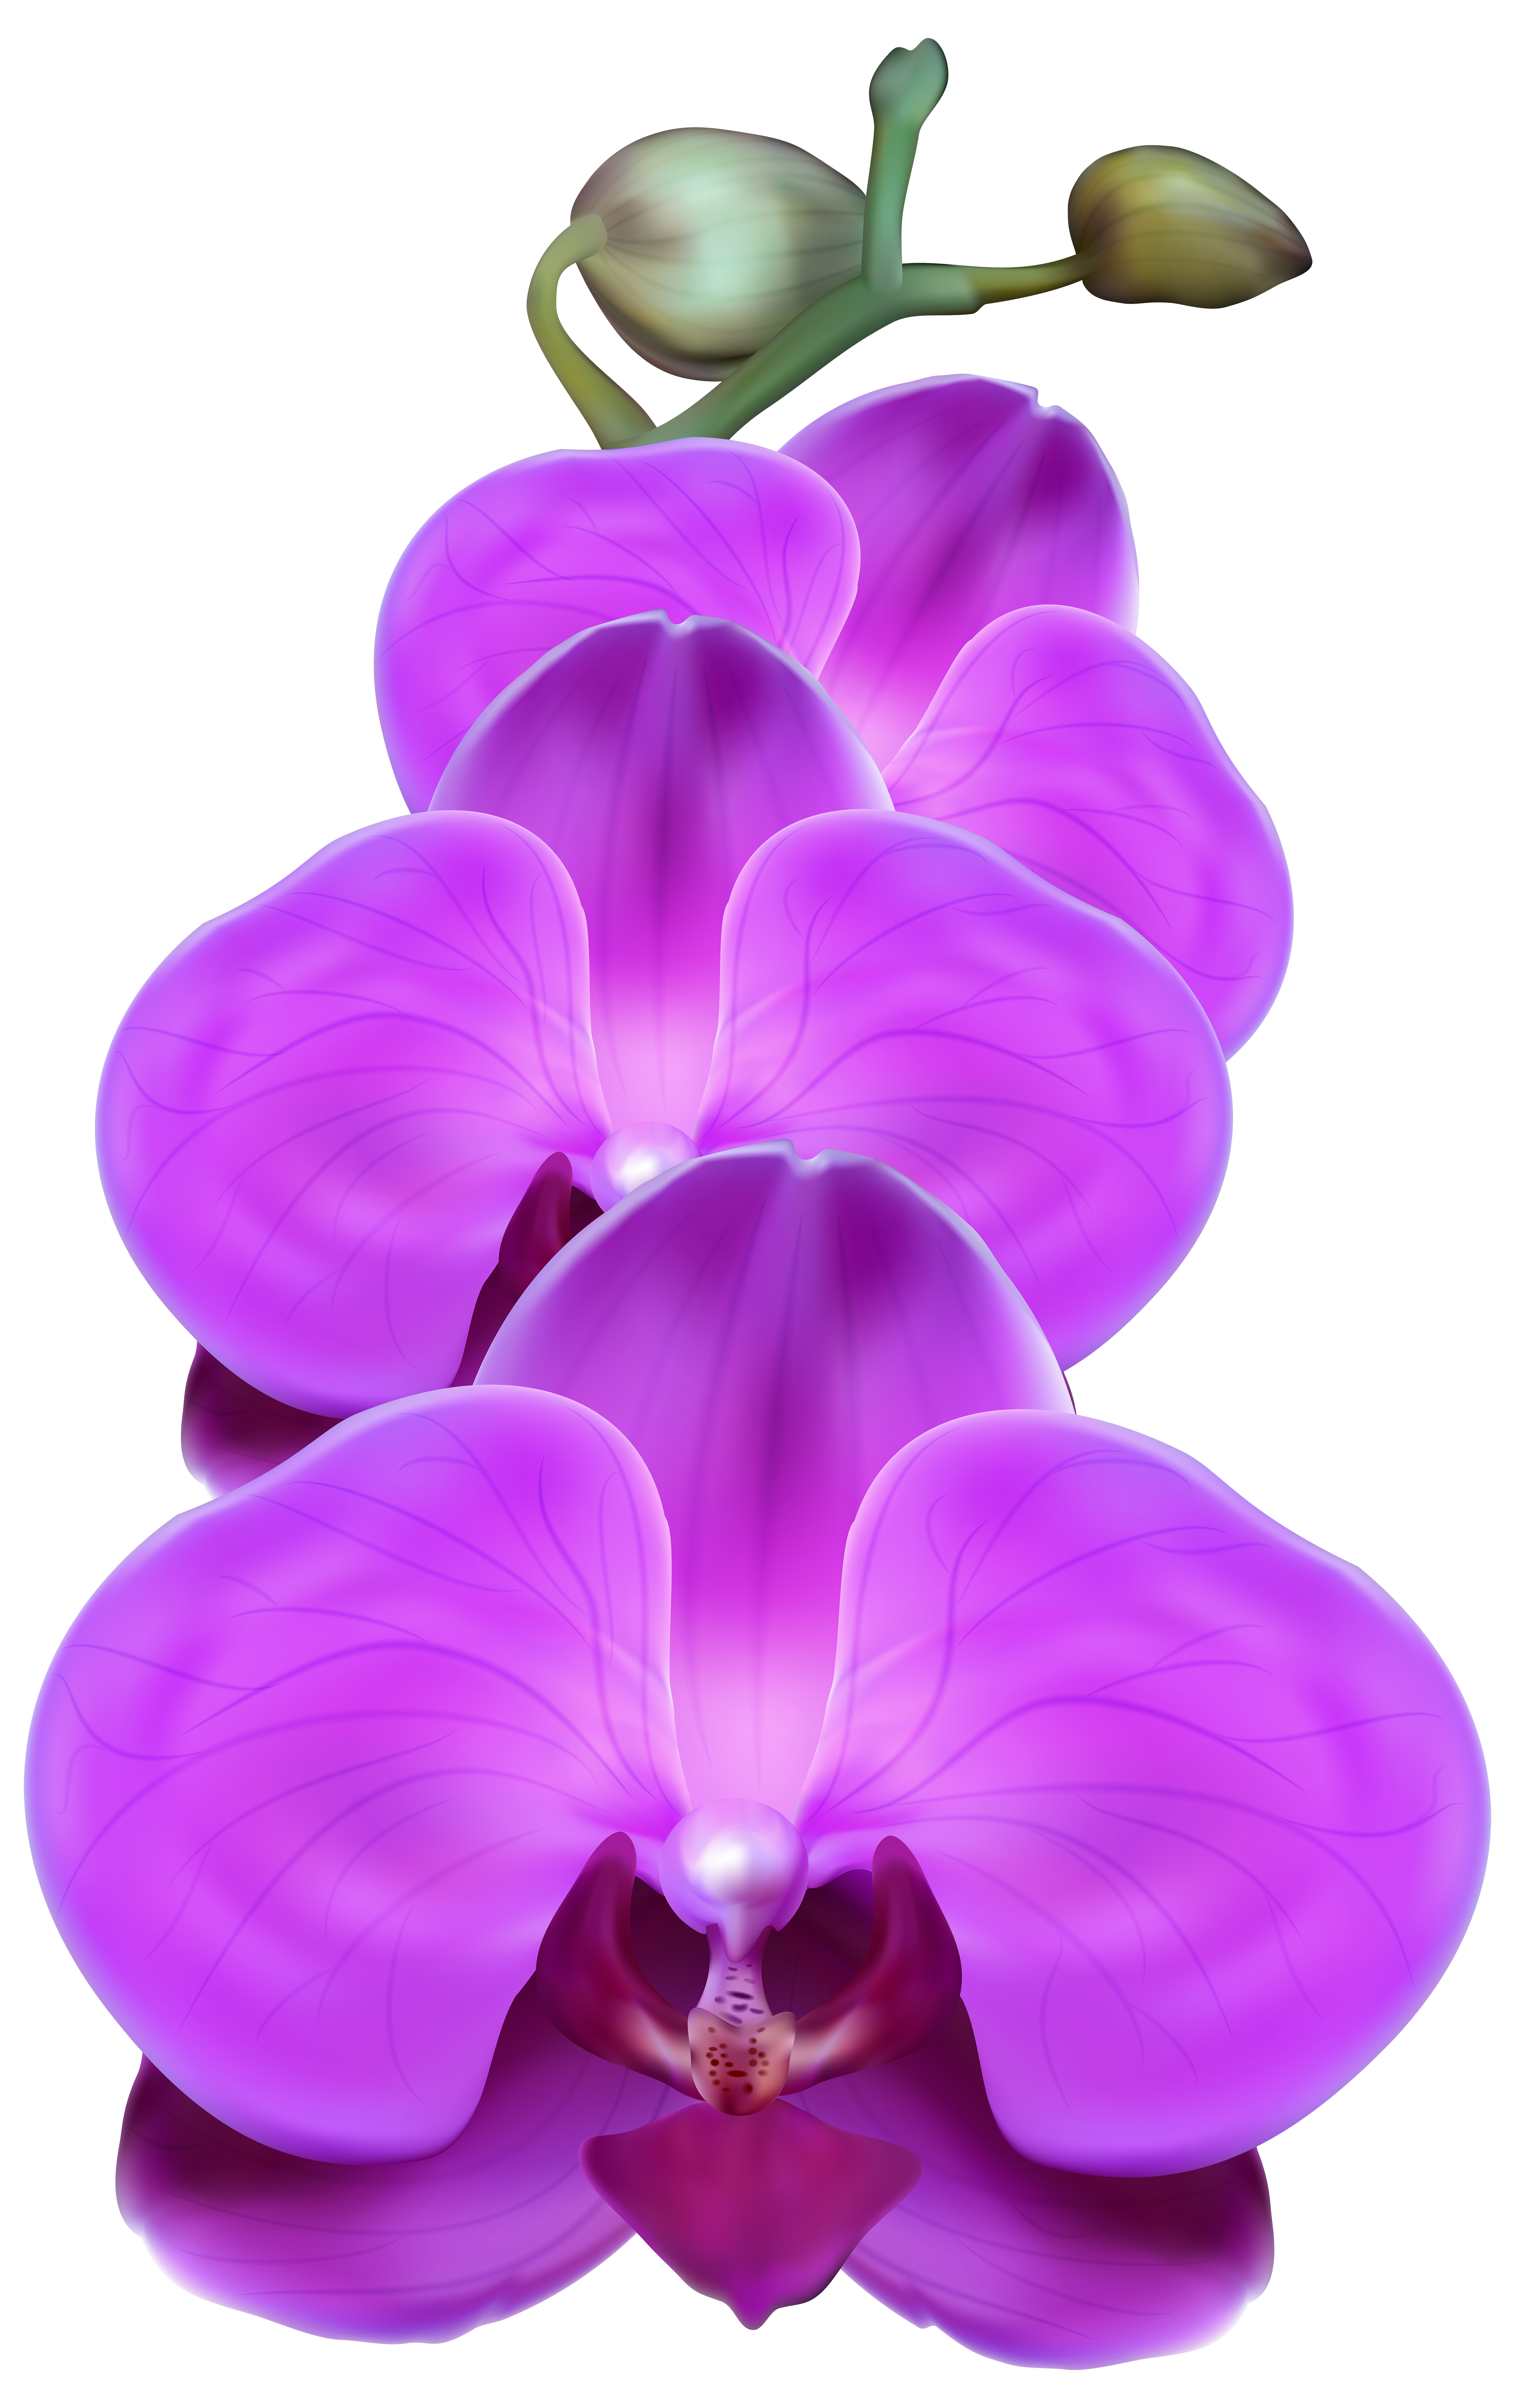 Purple Orchid PNG Transparent Clip Art Image | Gallery Yopriceville ...